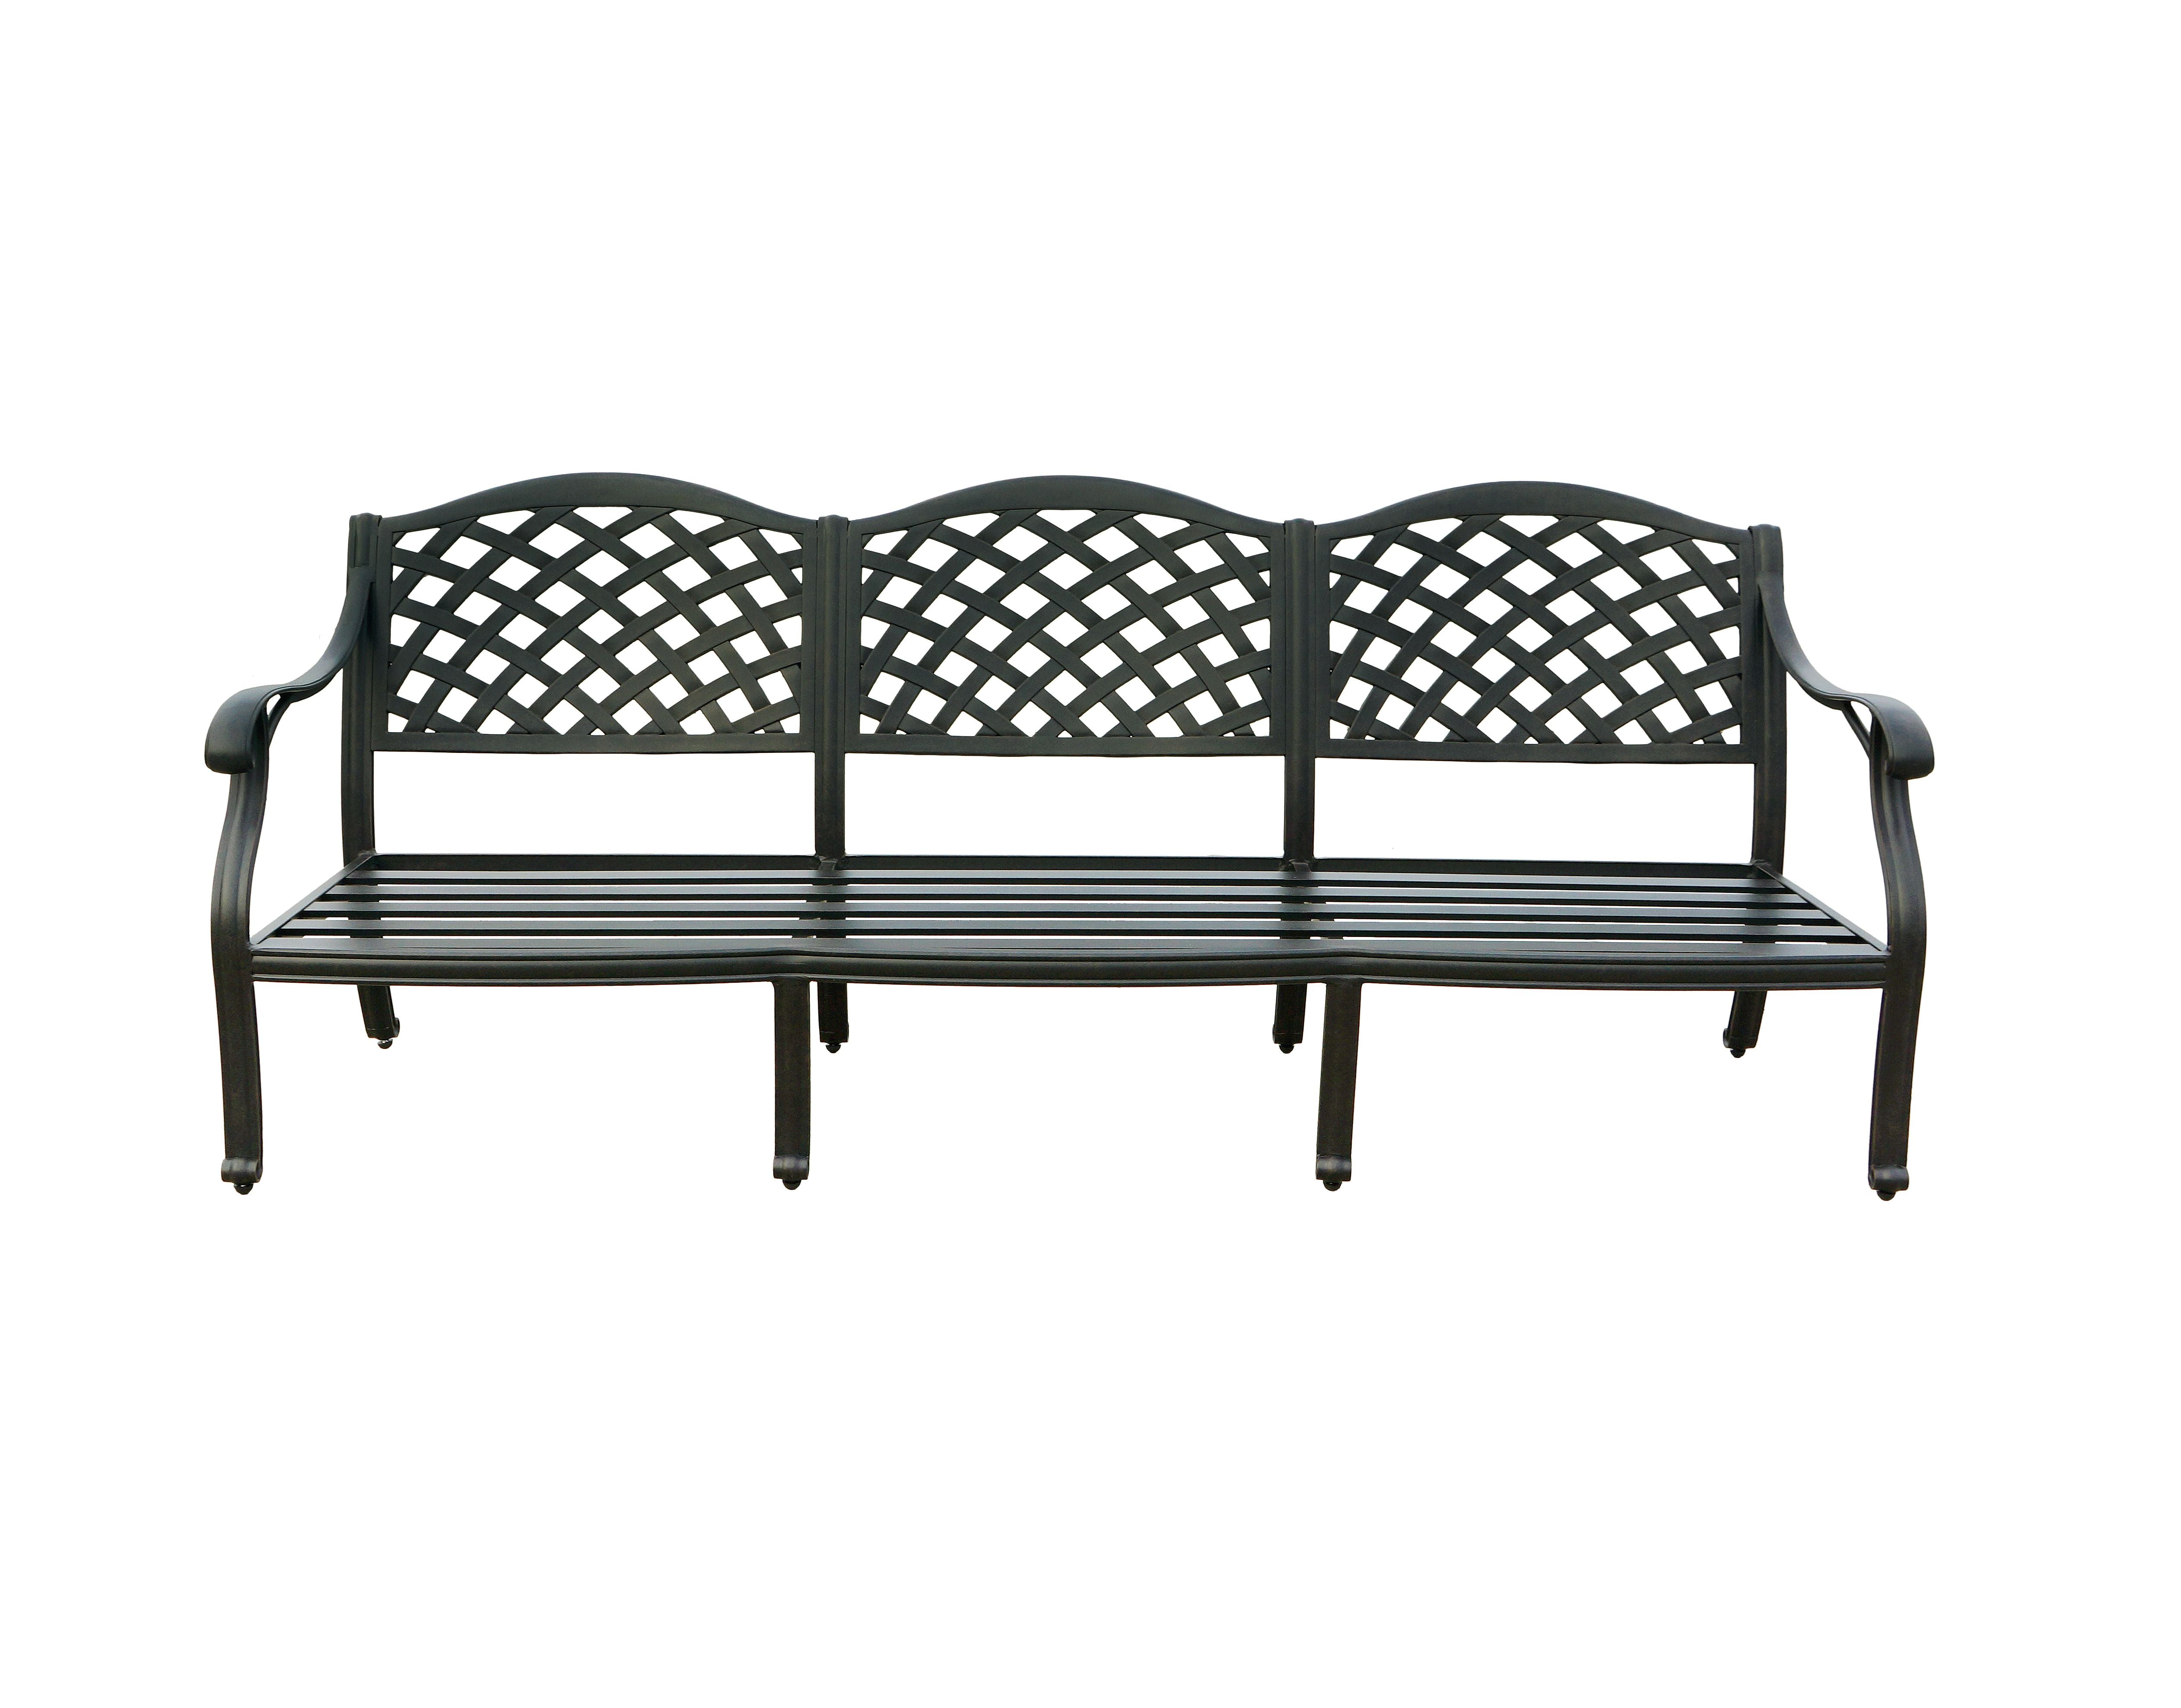 Darlee - Nassau 4-Piece Patio Deep Seating Group with Seat and Back Cushions - DL603